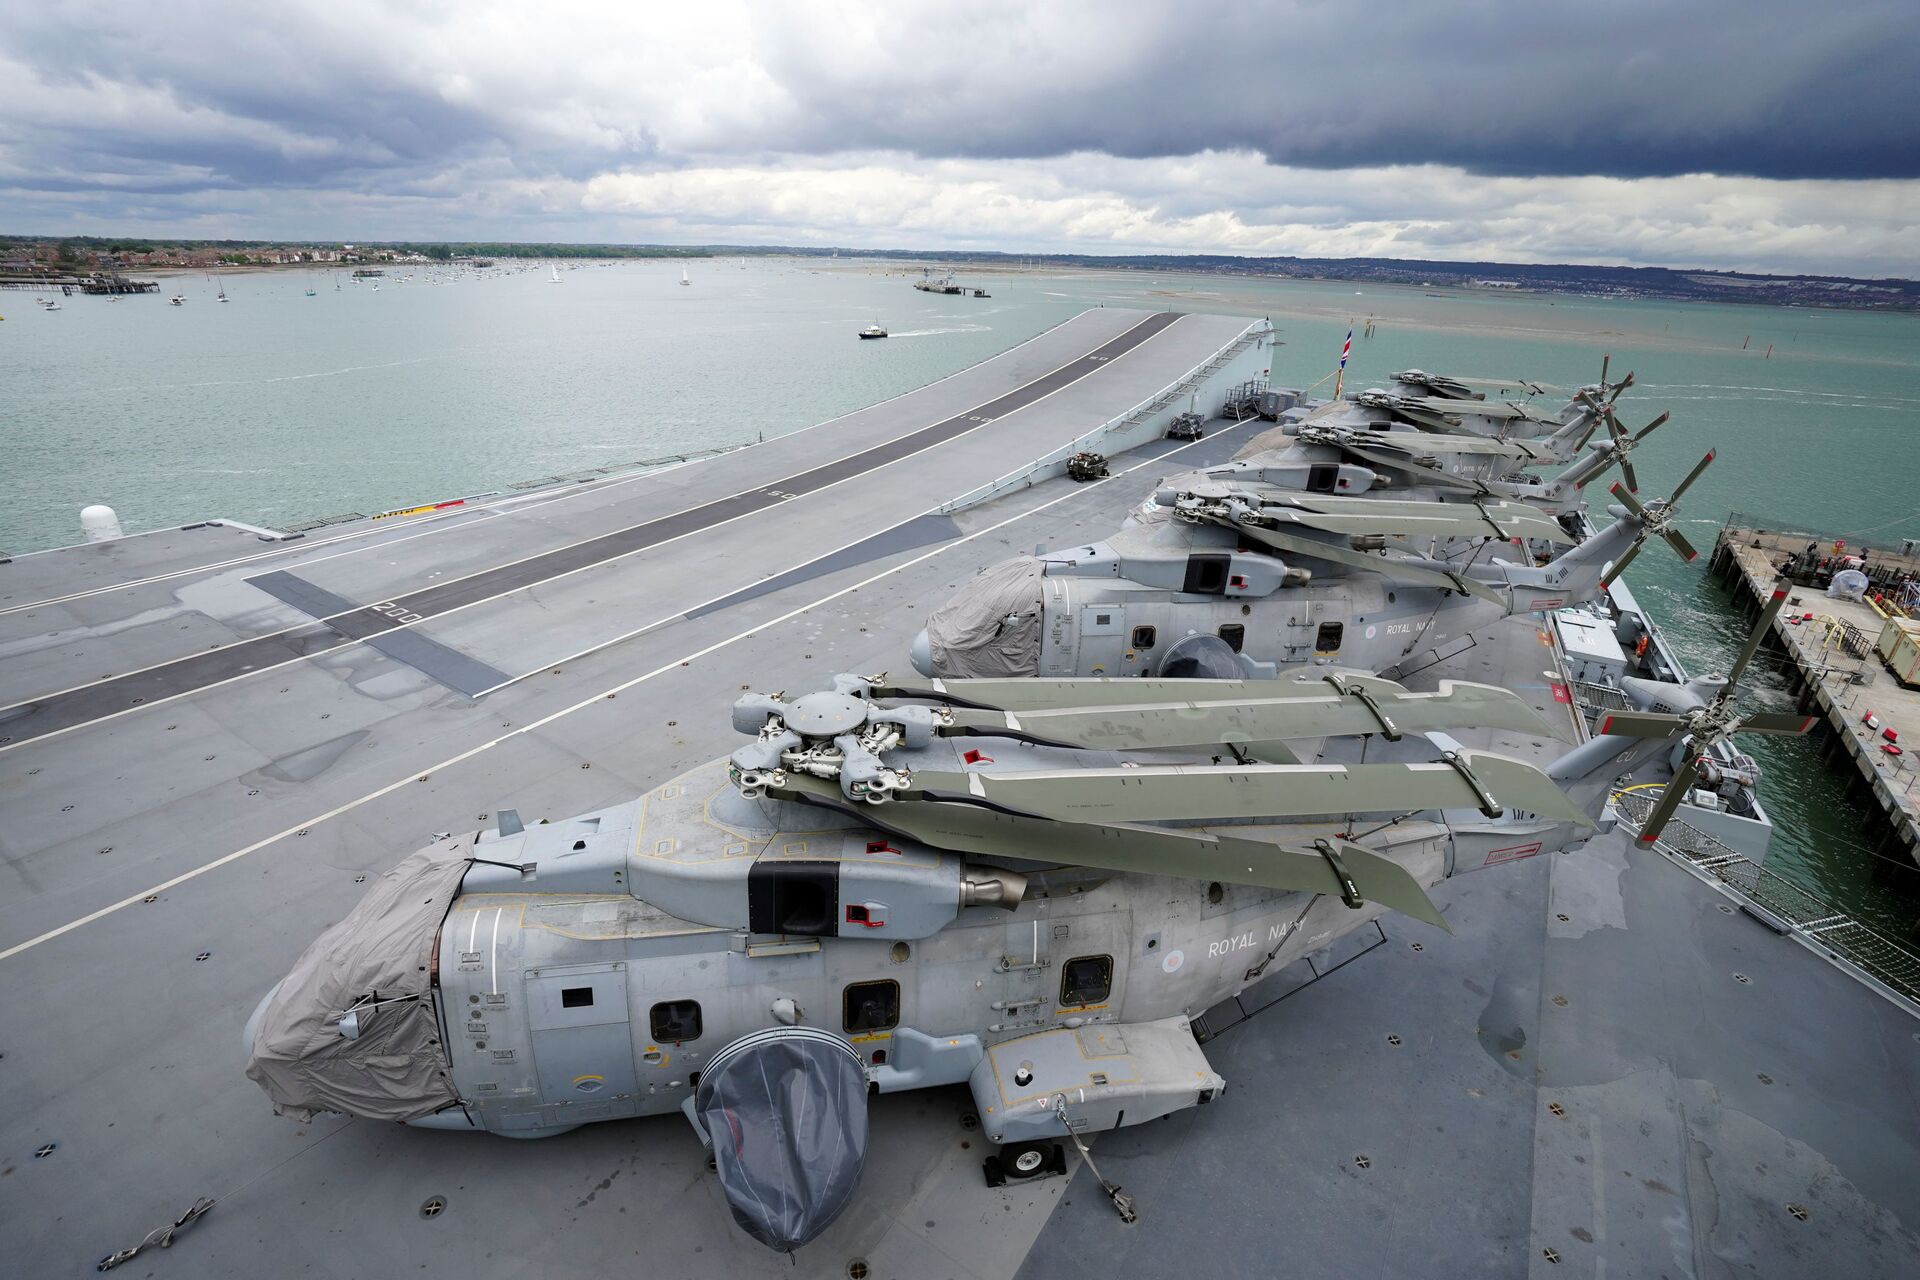 Royal Navy Merlin helicopters are seen on the flight deck during Britain's Queen Elizabeth's visit to HMS Queen Elizabeth ahead of the ship's maiden deployment at HM Naval Base in Portsmouth, Britain May 22, 2021 - Sputnik International, 1920, 07.09.2021